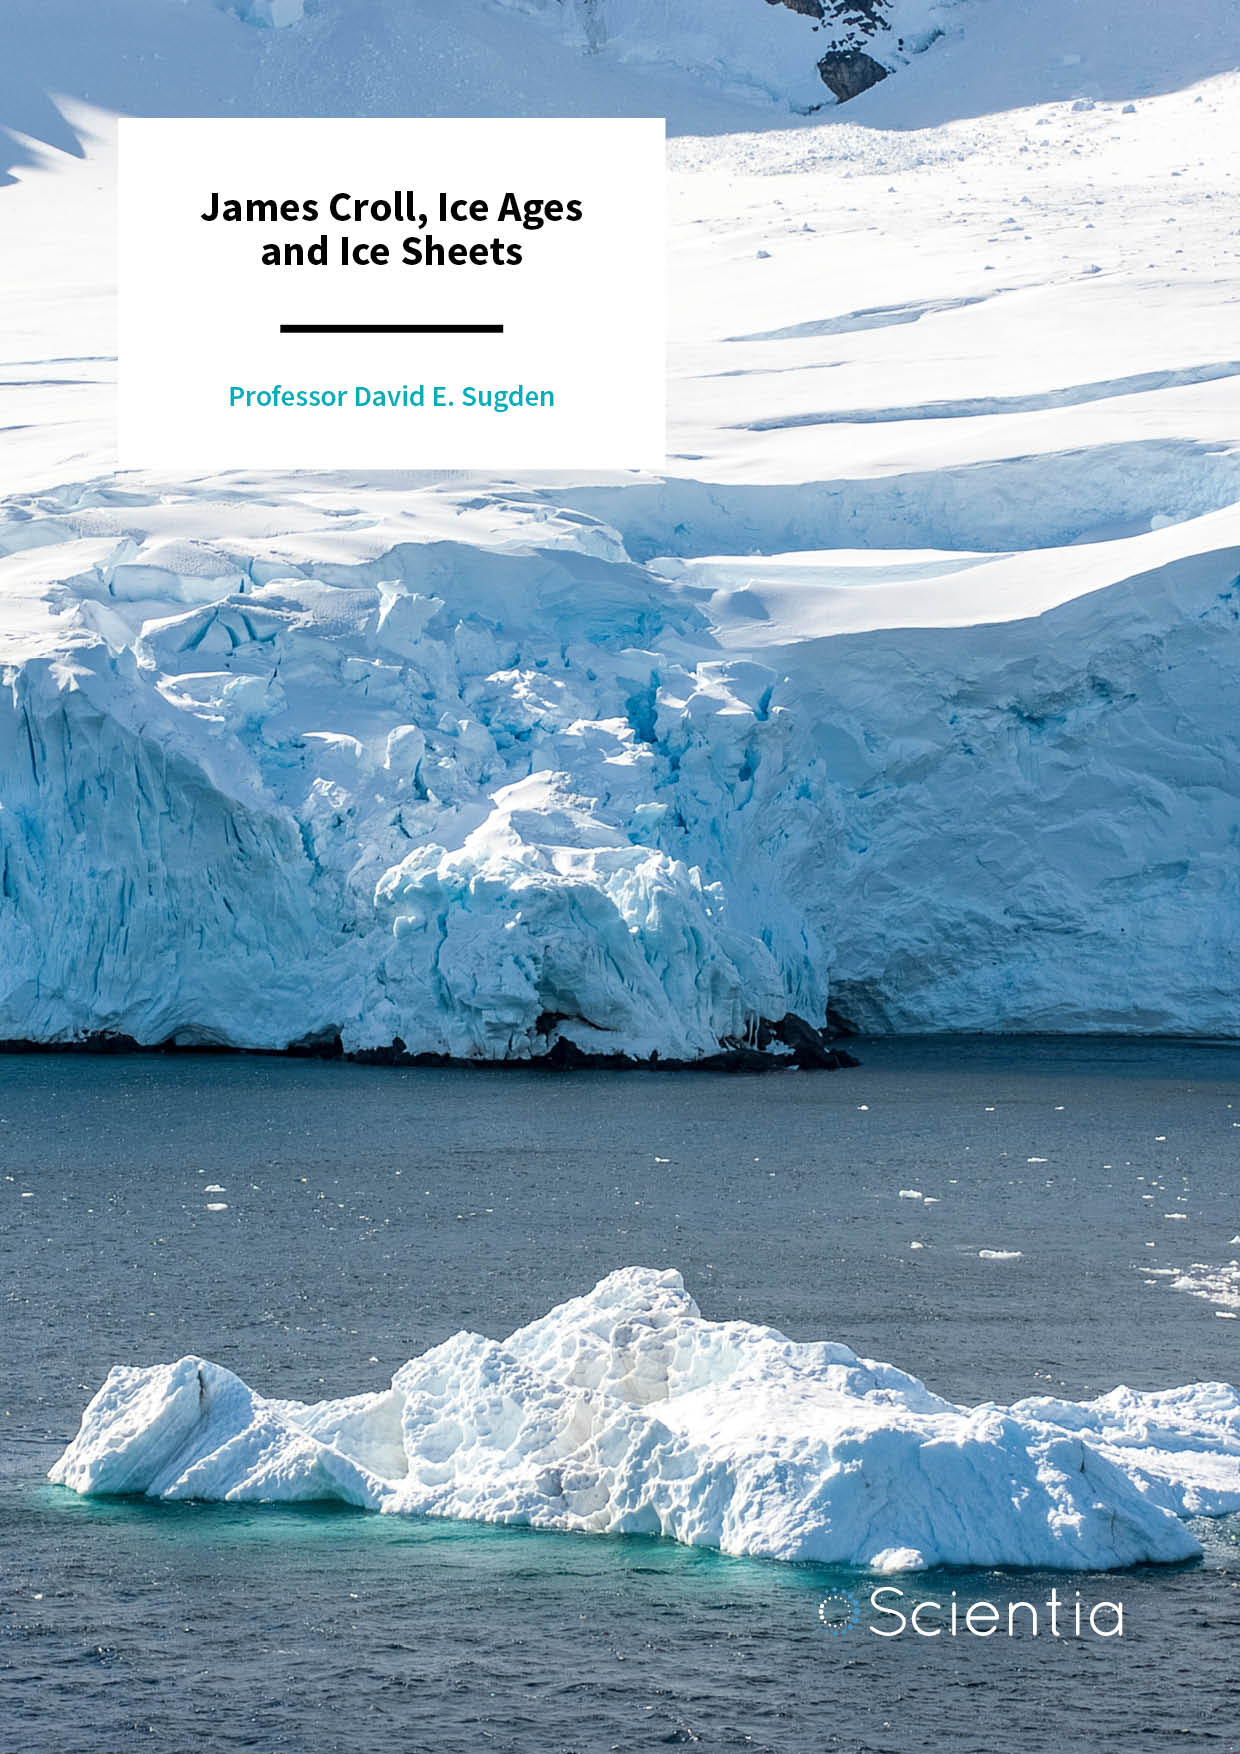 Professor David E. Sugden | James Croll, Ice Ages and Ice Sheets